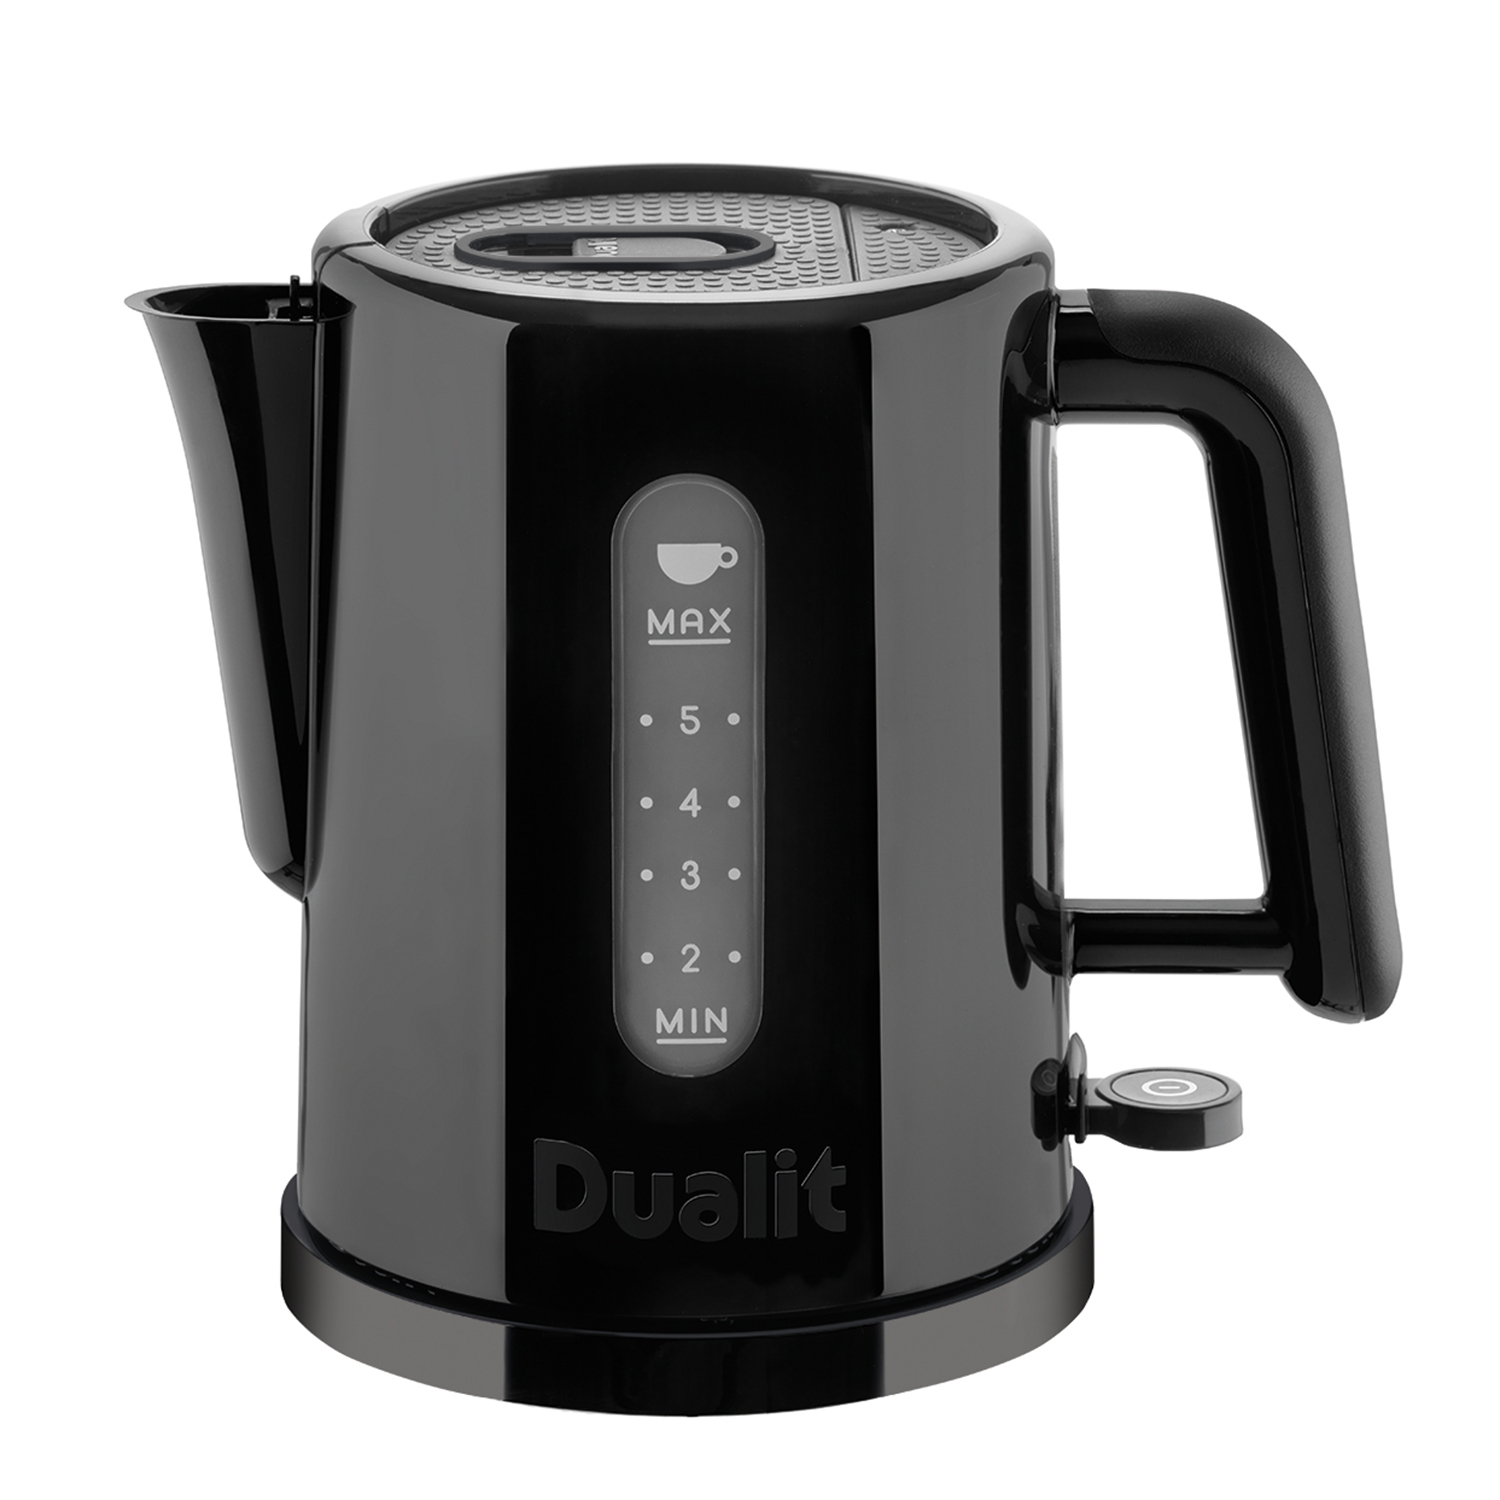 dualit kettle best price